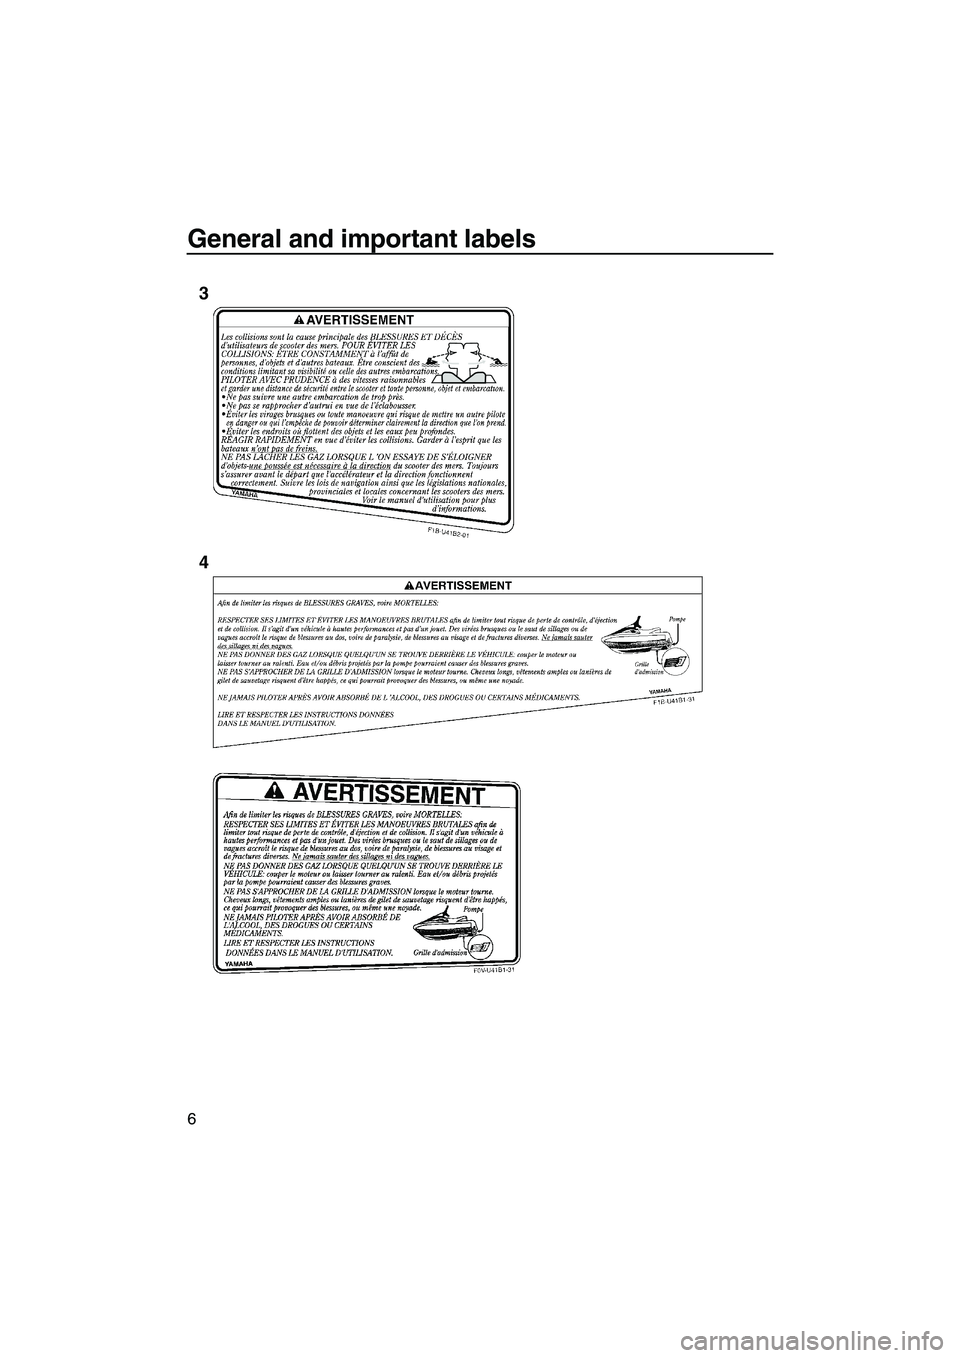 YAMAHA VX SPORT 2013 User Guide General and important labels
6
3
4
UF2P70E0.book  Page 6  Tuesday, July 31, 2012  1:48 PM 